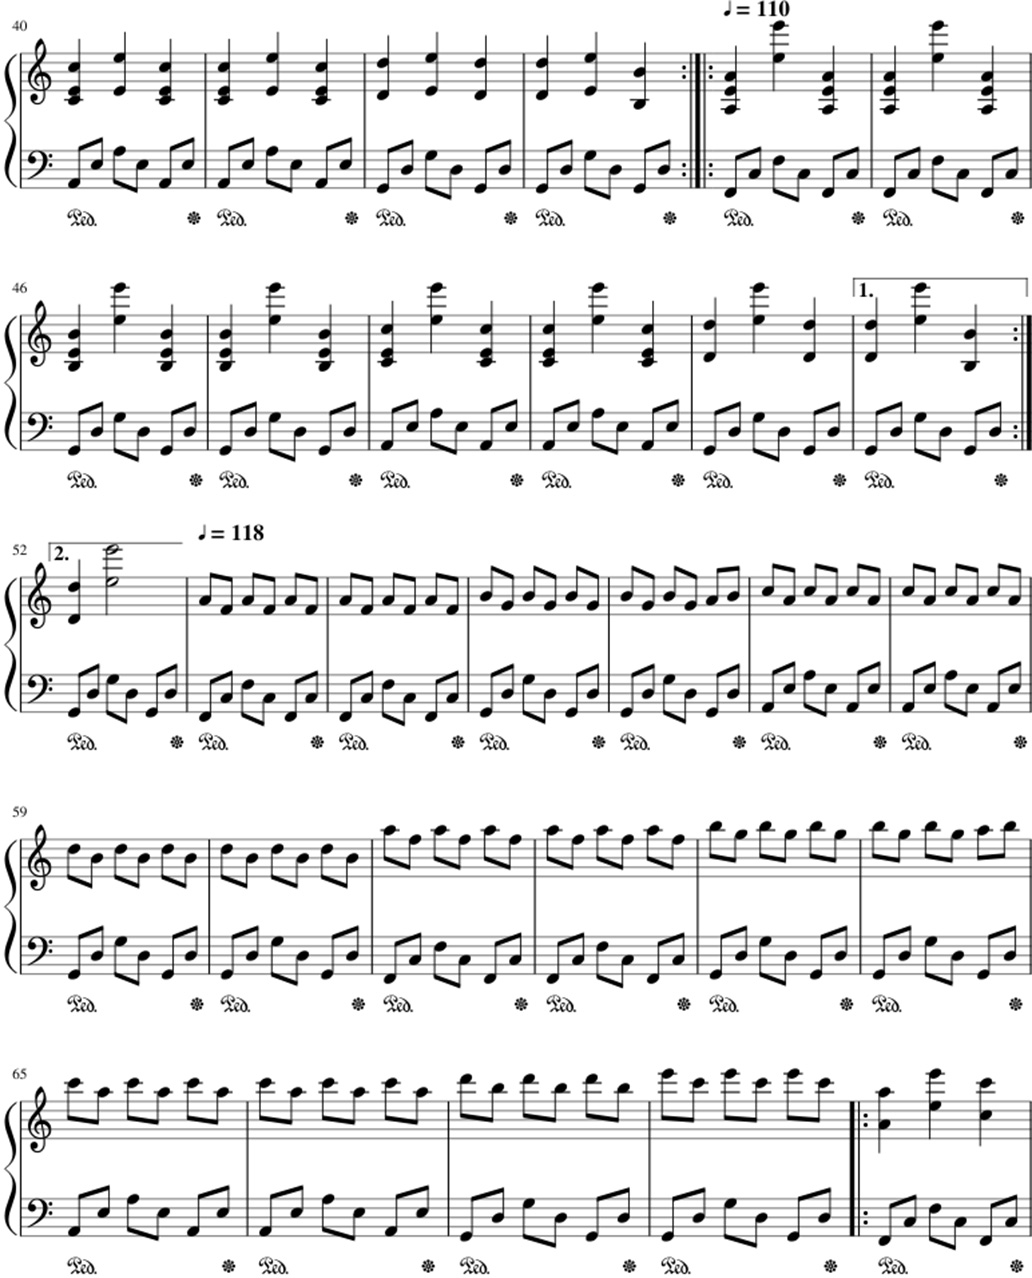 Stay sheet music notes 2